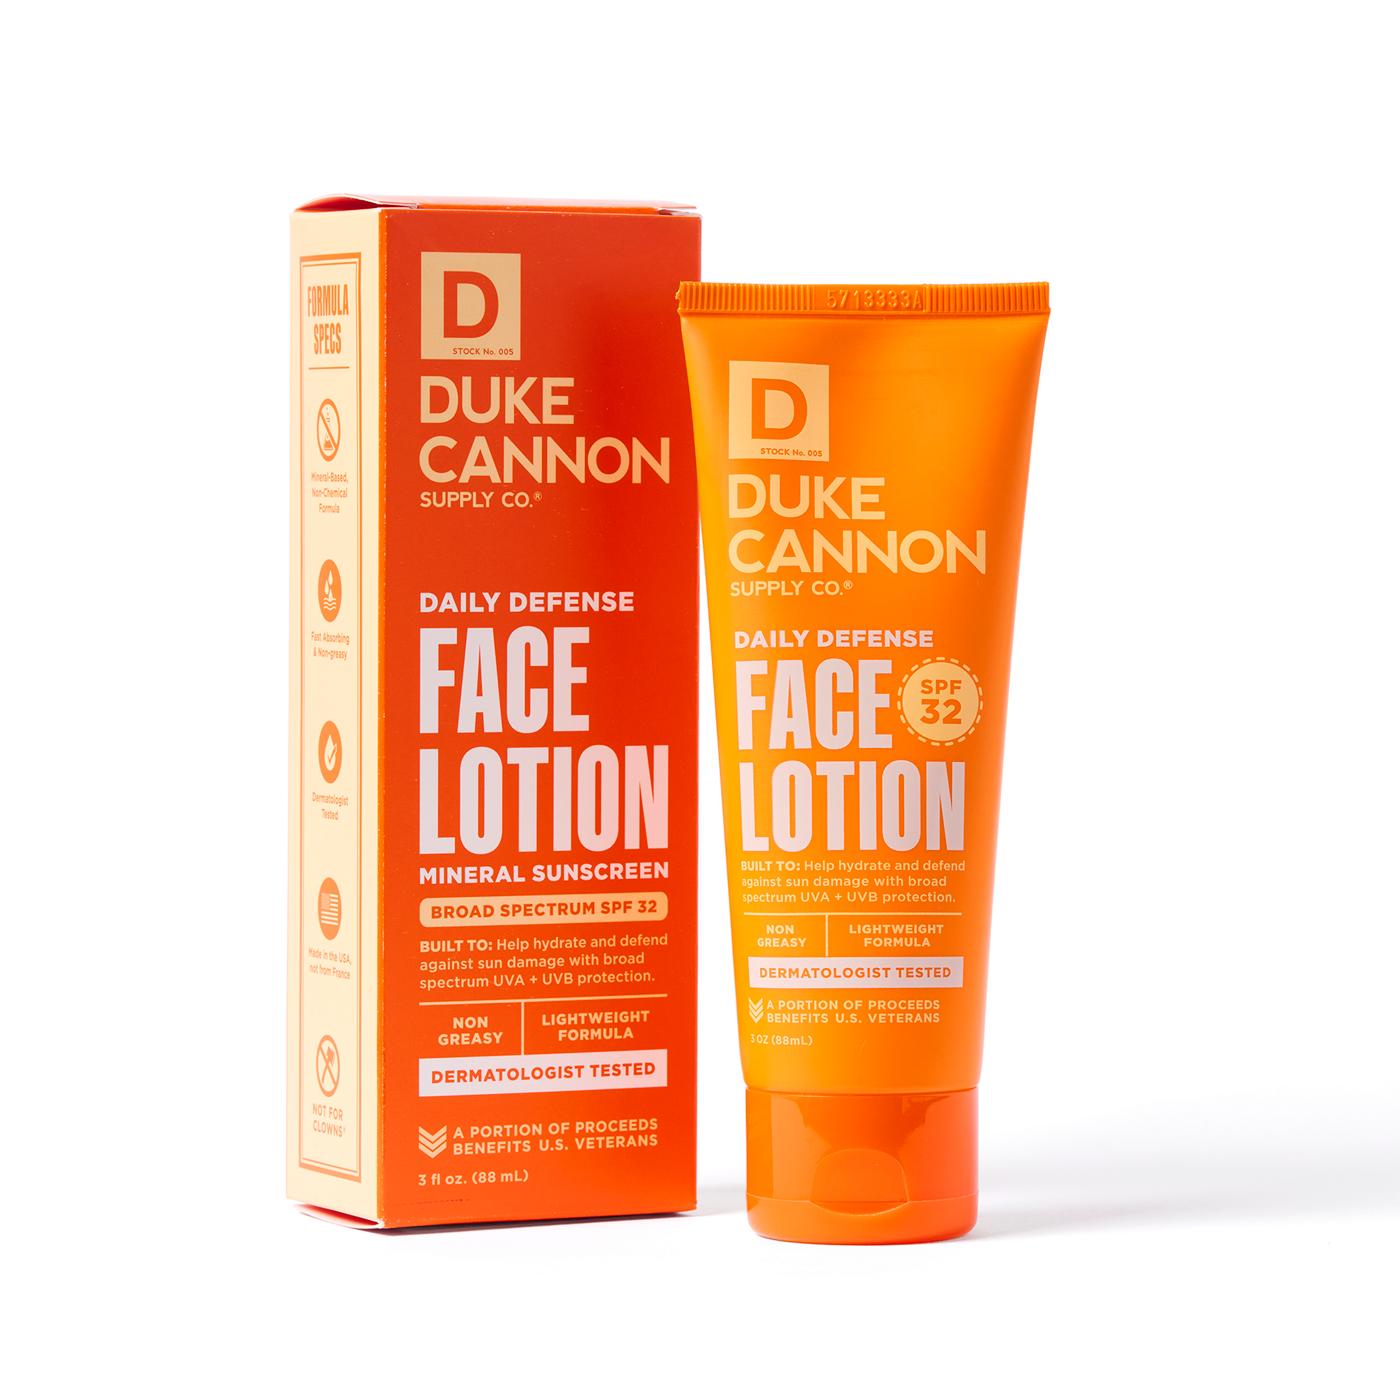 Duke Cannon Daily Defense Face Lotion; image 5 of 7